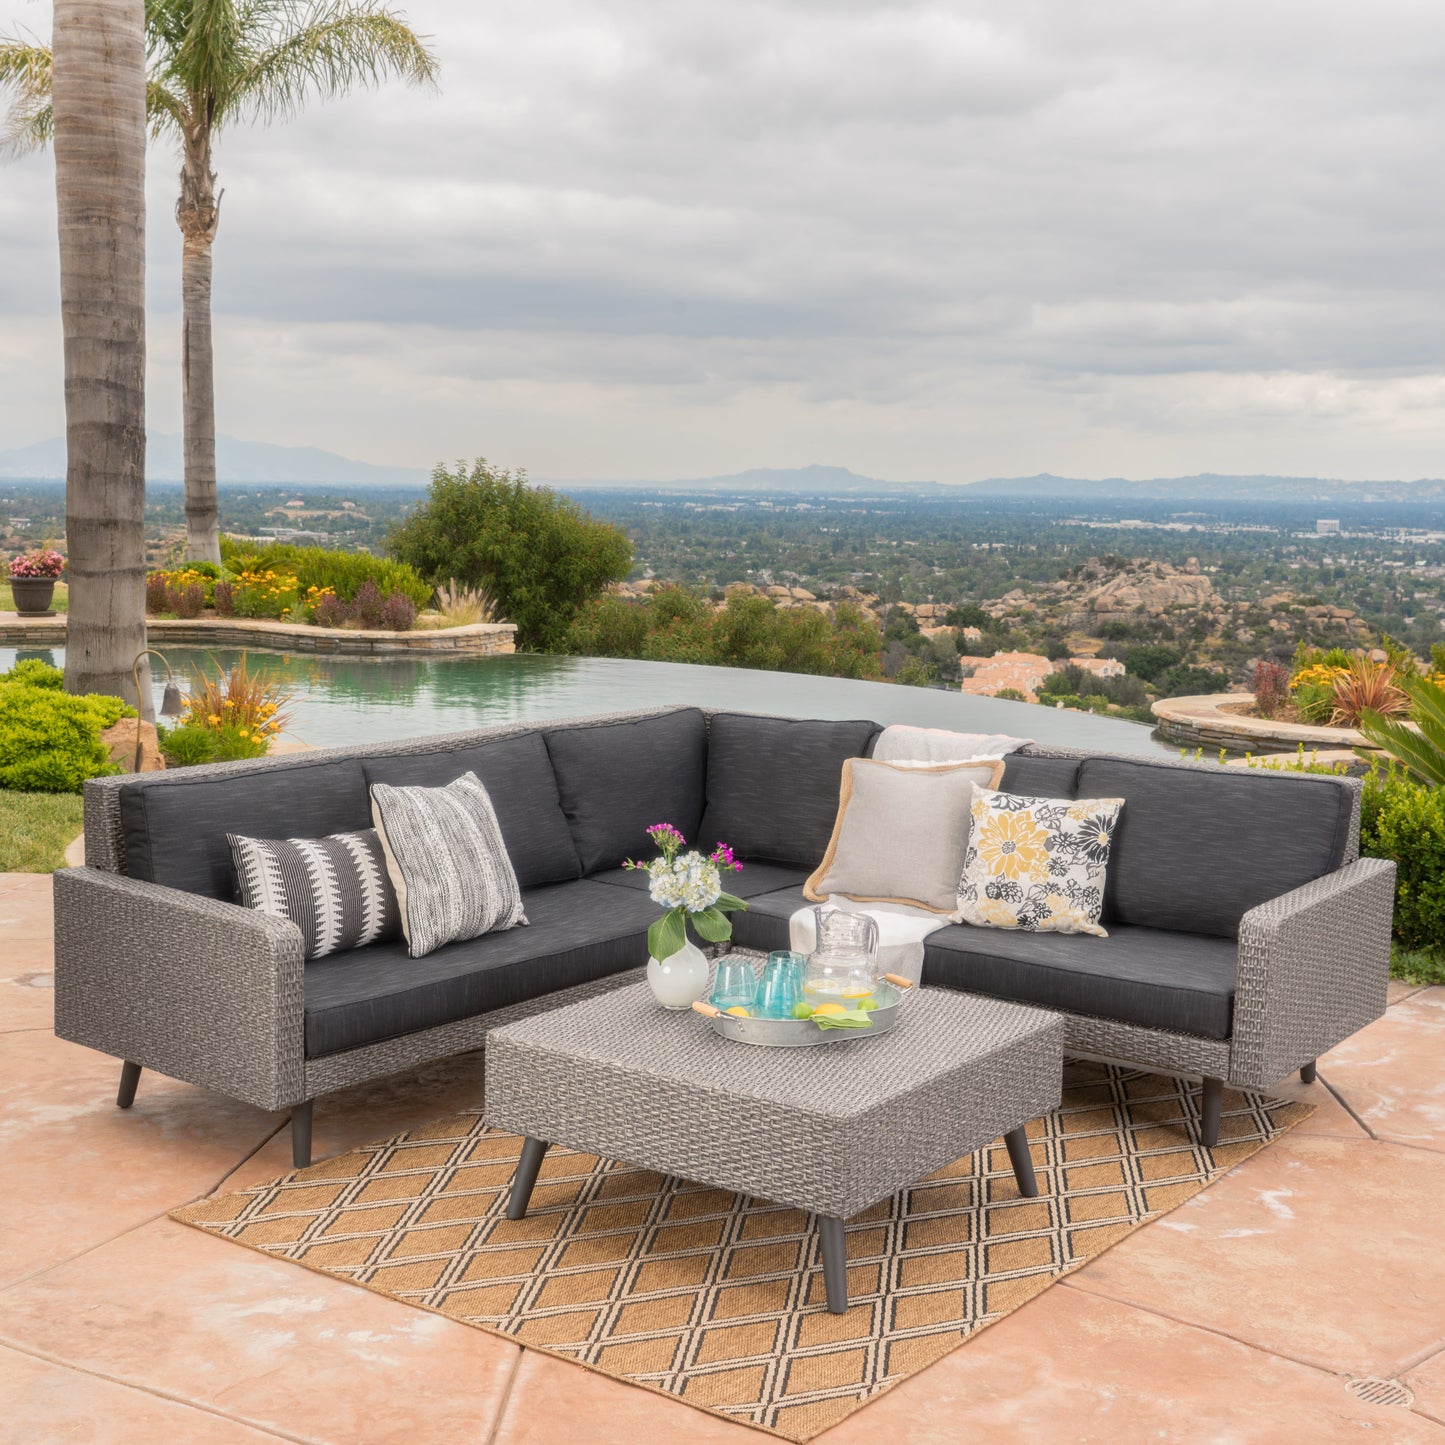 Hensley Outdoor Wicker 5 Seater Sectional Sofa Chat Set with Cushions, Mixed Black and Dark Gray